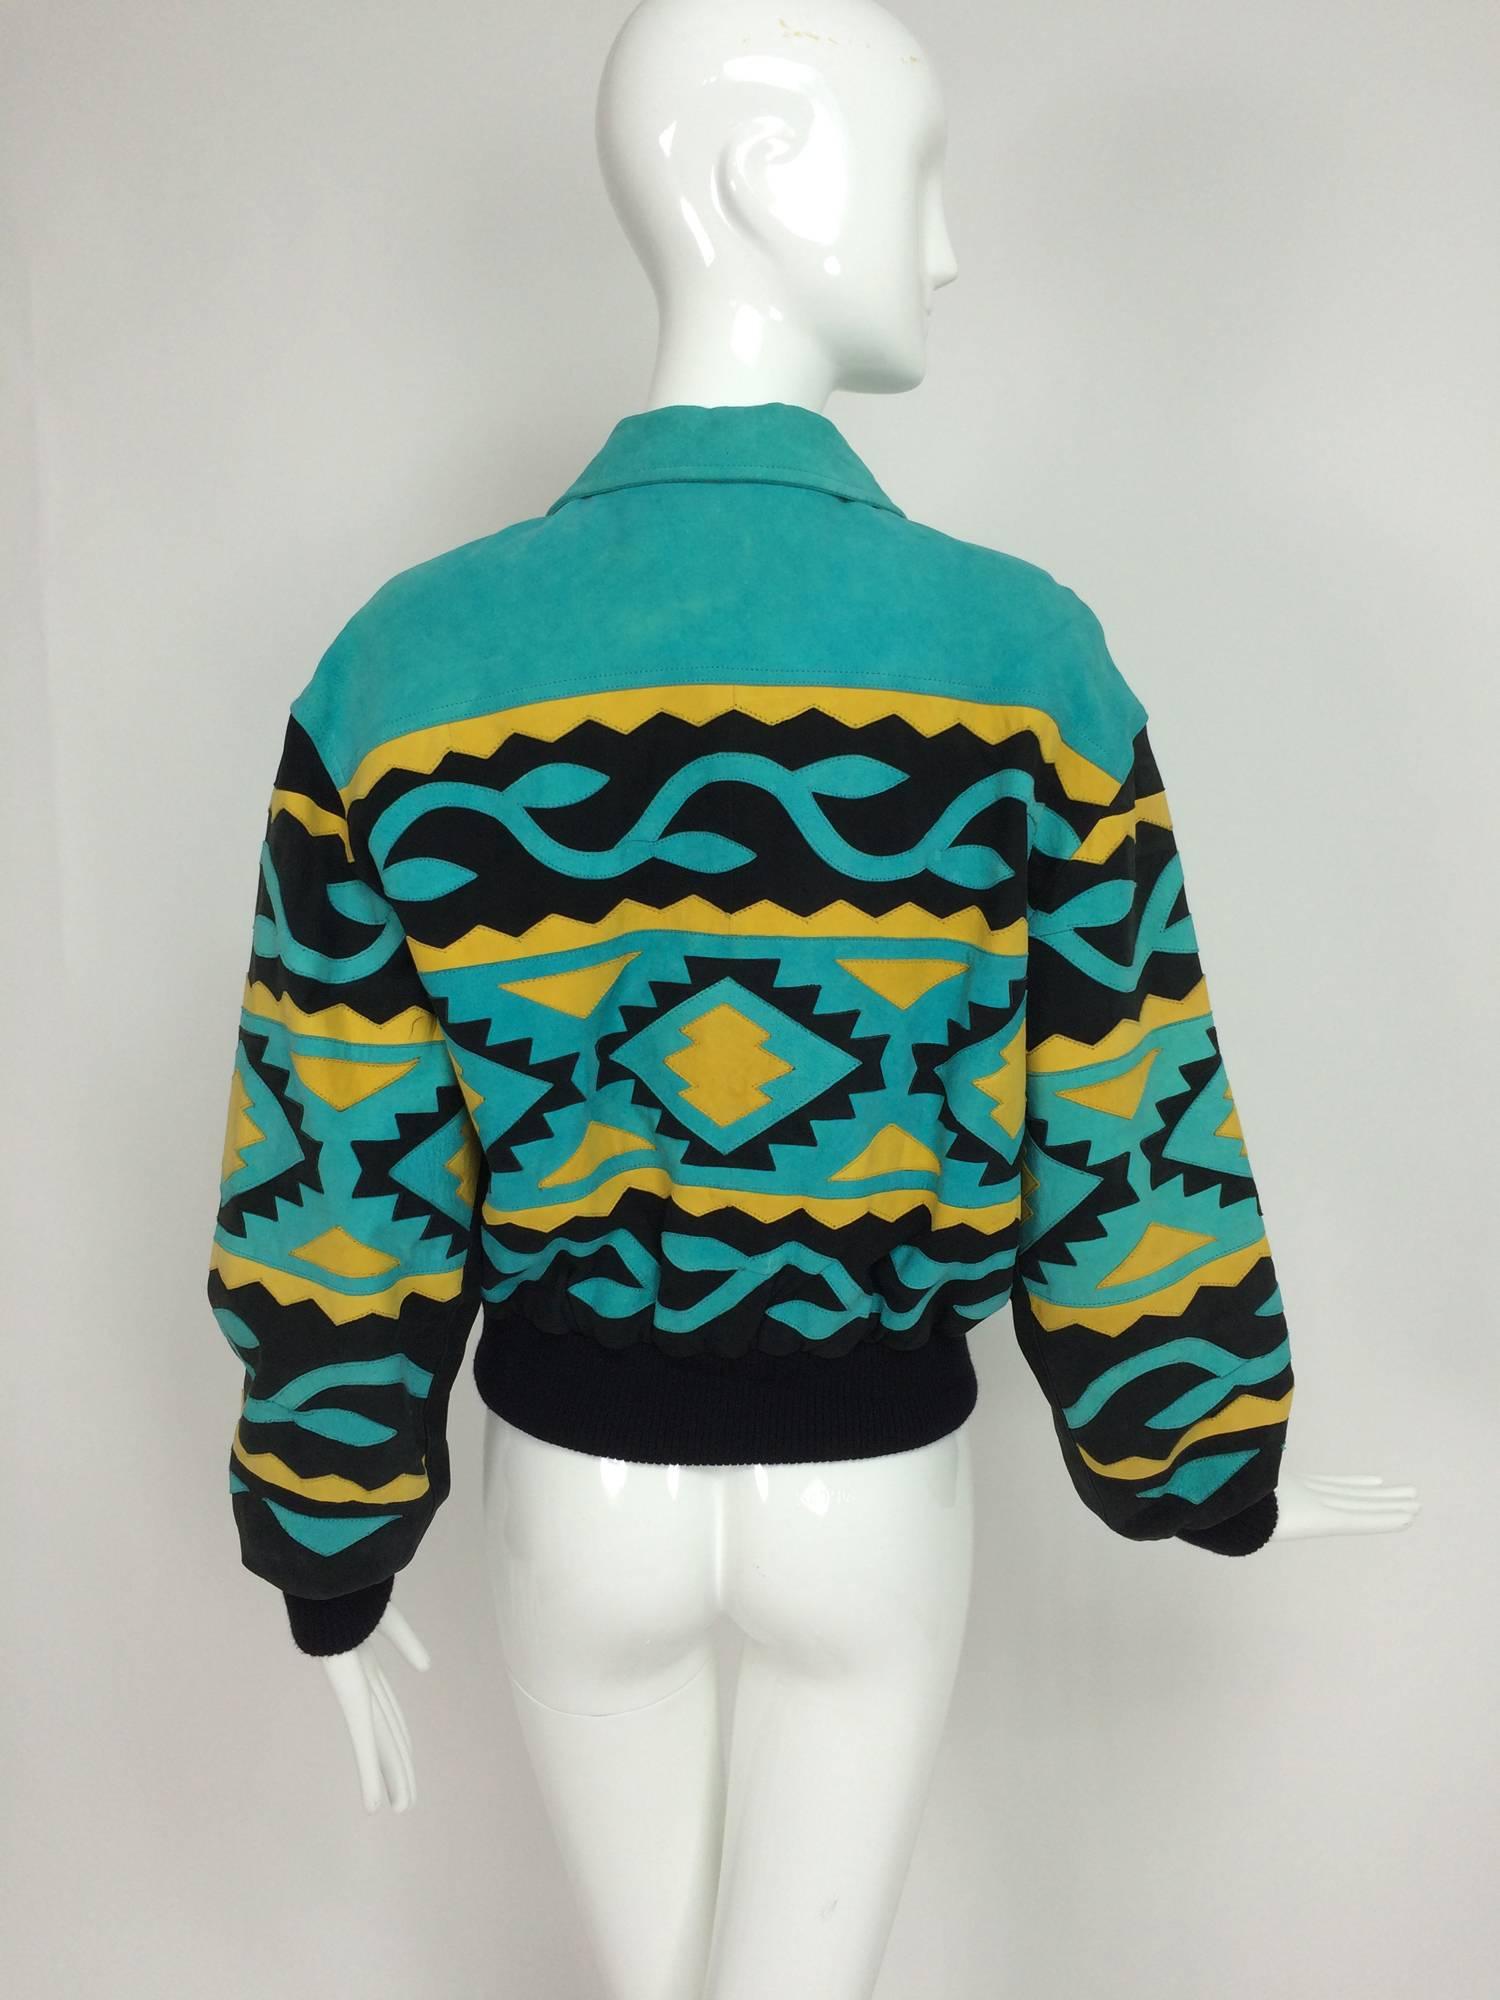 Michael Hoban for North Beach Leather intarsia suede tribal jacket 1980s. Turquoise suede with inlay of black and yellow suede in a native tribal design. the jacket closes at the front with a heavy metal zipper, with front angled pockets and a